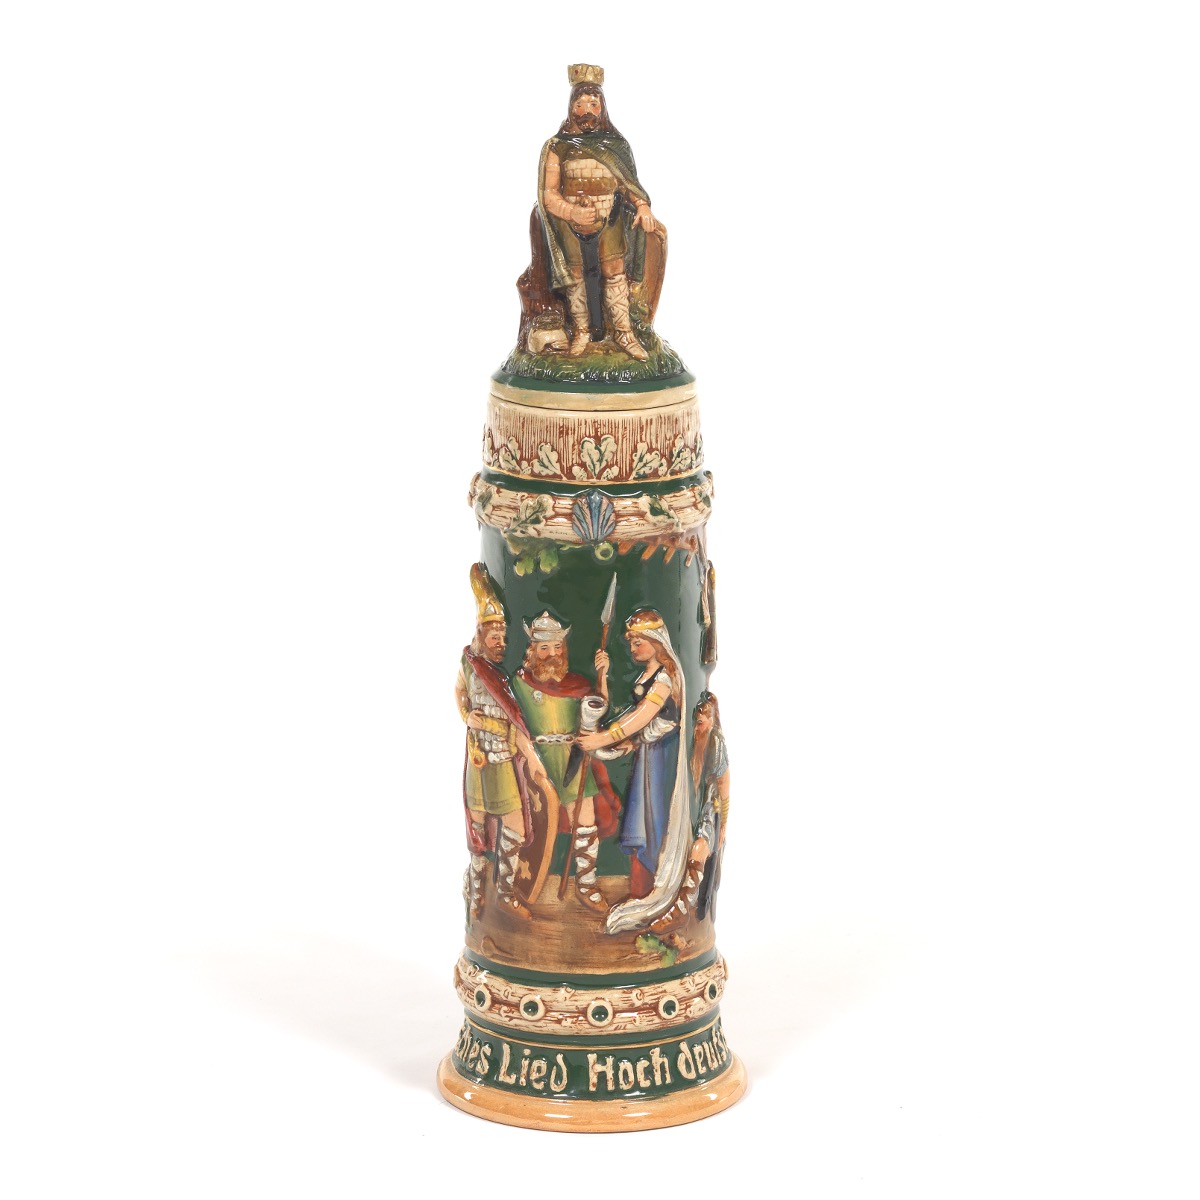 German Ceramic Stein "The Ring of the Nibelung" - Image 2 of 10